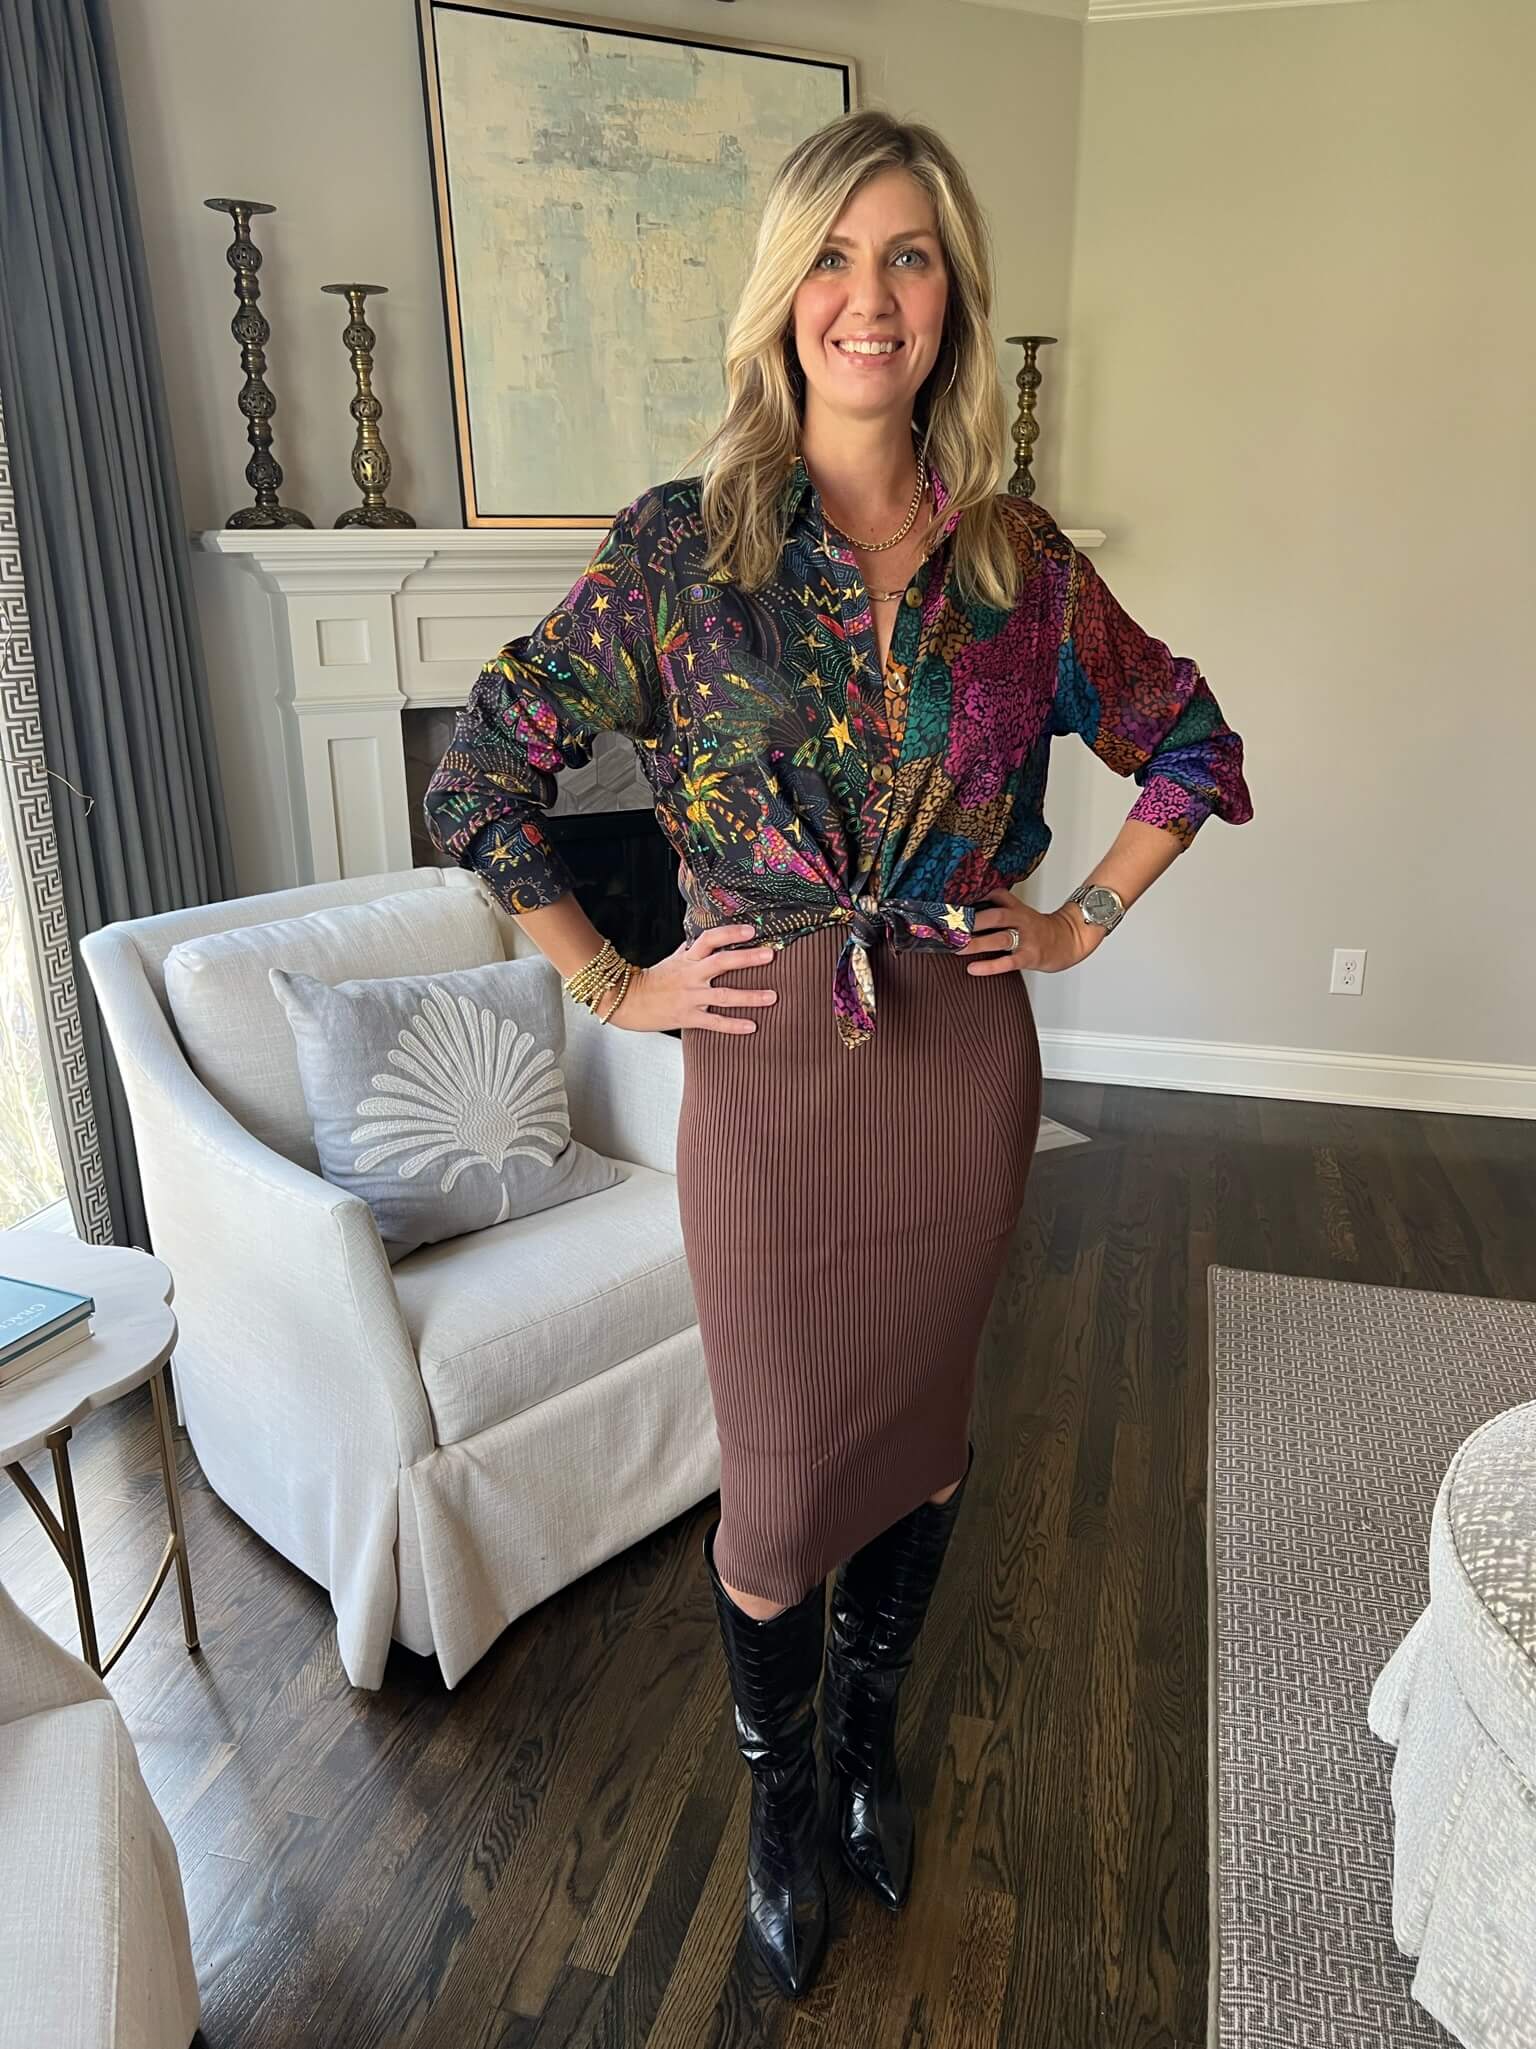 How To Wear Our Winter Capsule Wardrobe - Part 2 Printed Blouse & Midi Skirt & Black Boot